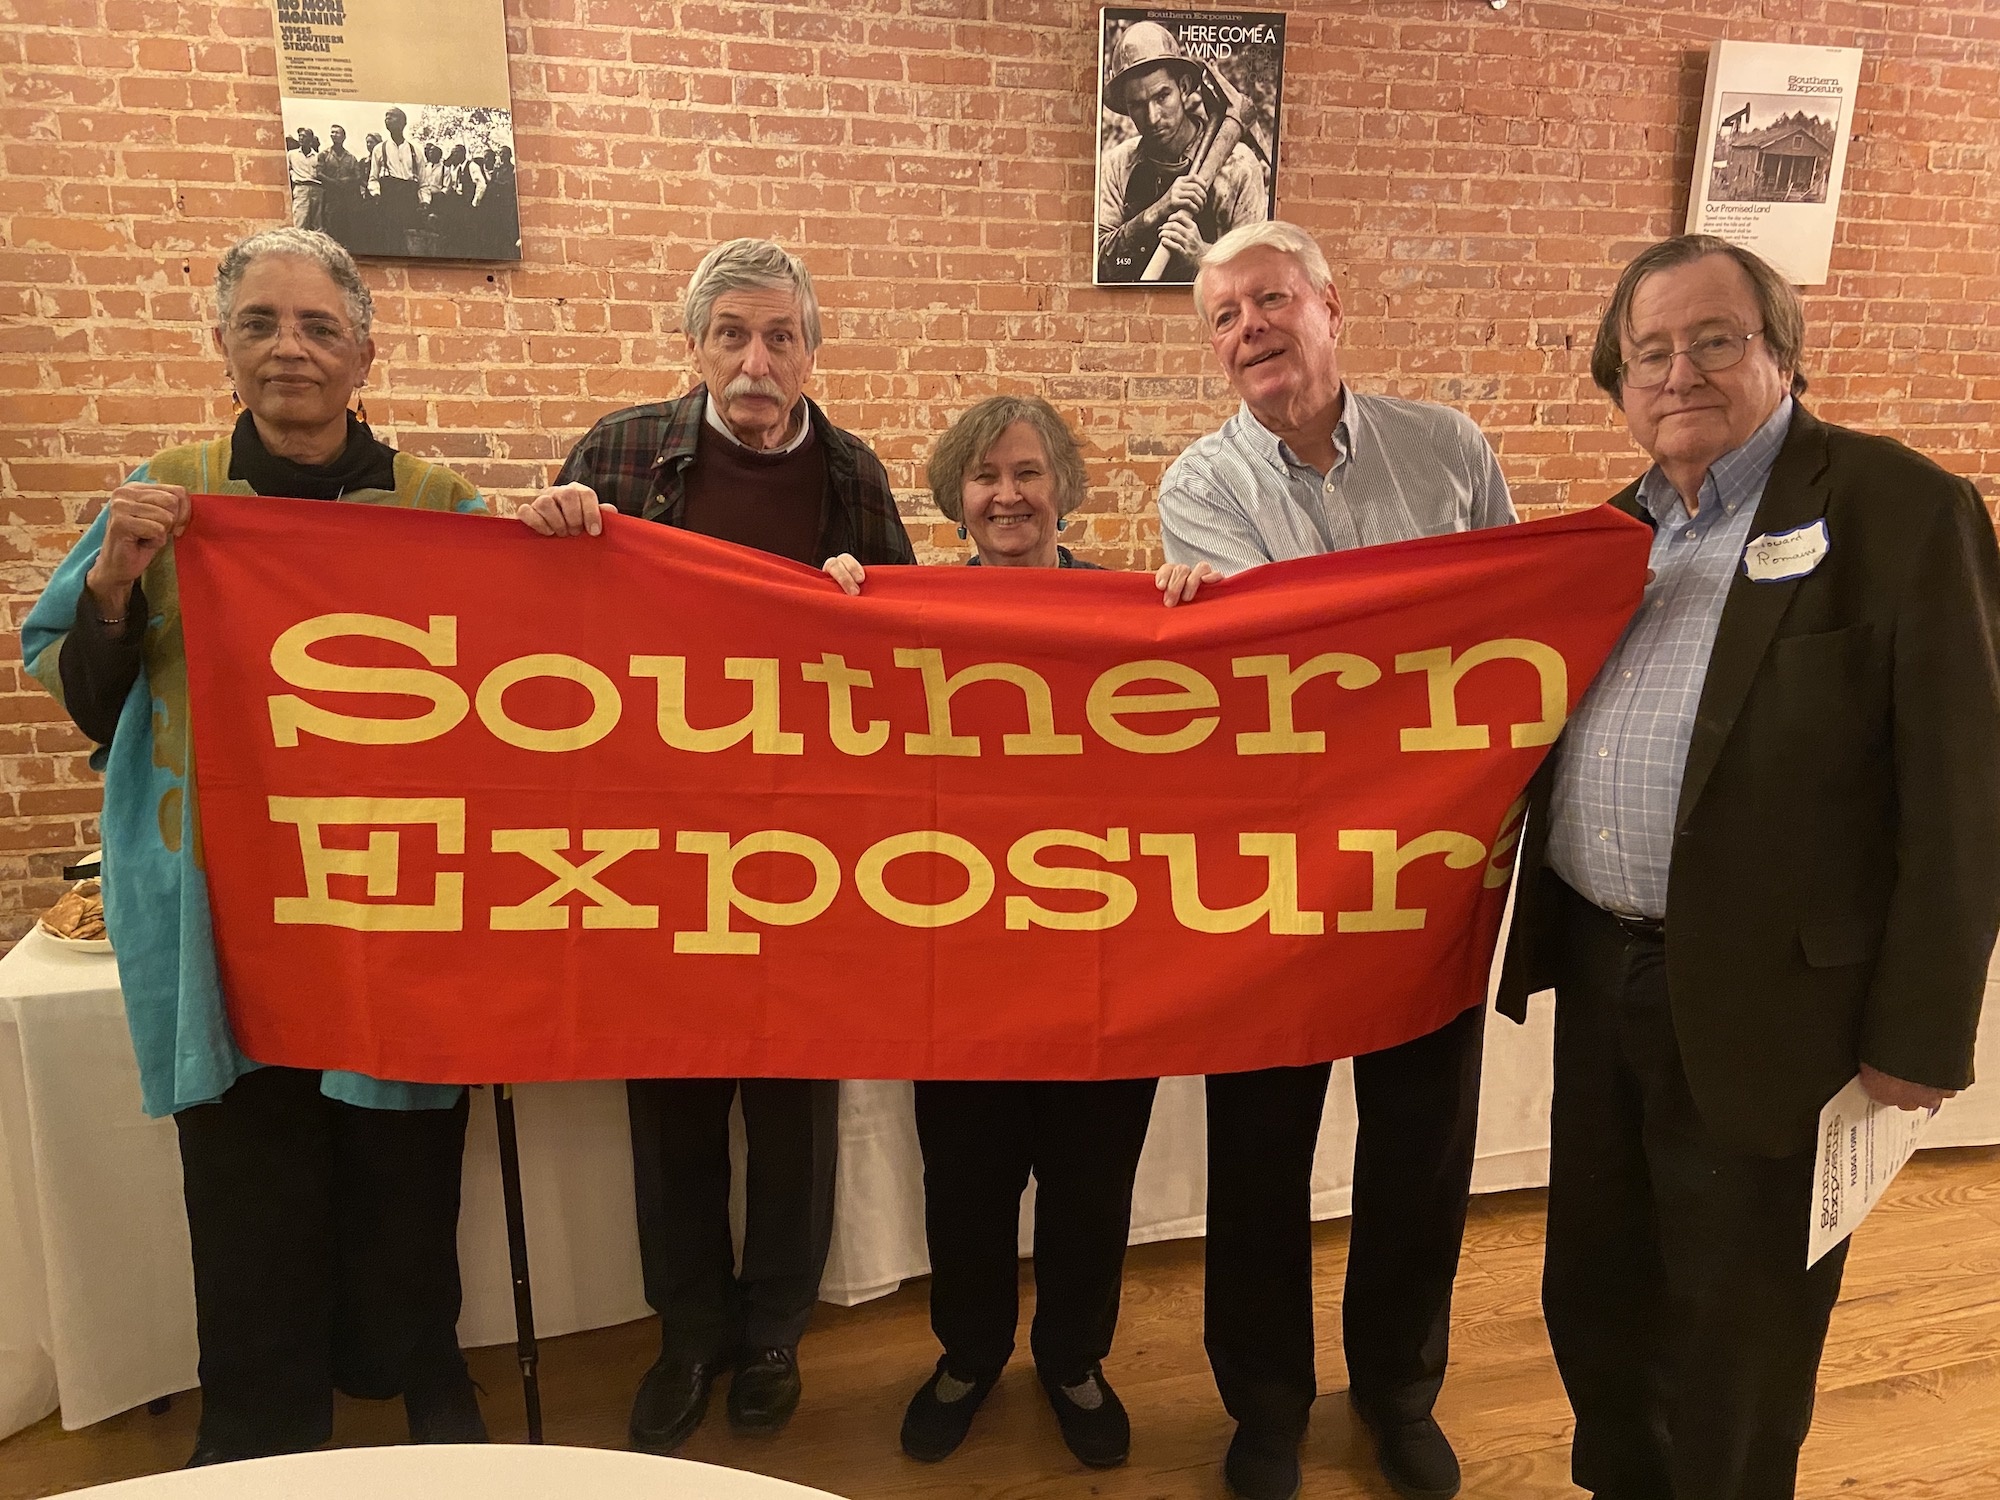 Five people holding up the Southern Exposure banner